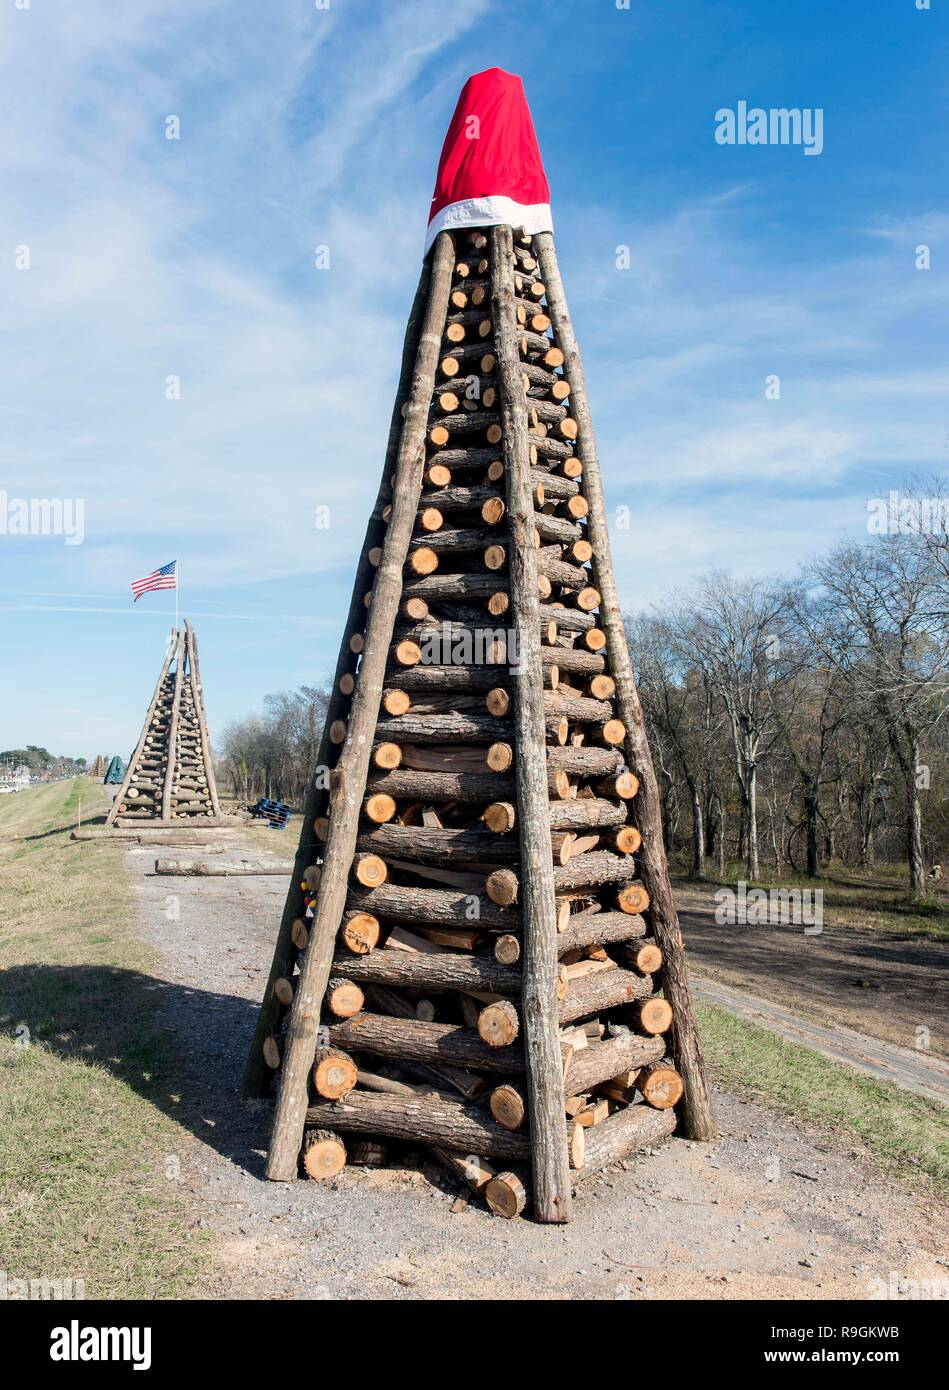 St. James Parish, Louisiana, USA. 21st Dec, 2018. On the earthen levees along the Mississippi River's Great River Road between New Orleans and Baton Rouge, 15-foot-high log structures are constructed each December by the residents of Gramercy, Lutcher and Paulina. These bonfire structures are ceremoniously set ablaze on Christmas Eve to help guide the route of ''Papa Noel, '' as Santa Claus is known among the Cajun population. Credit: Brian Cahn/ZUMA Wire/Alamy Live News Stock Photo